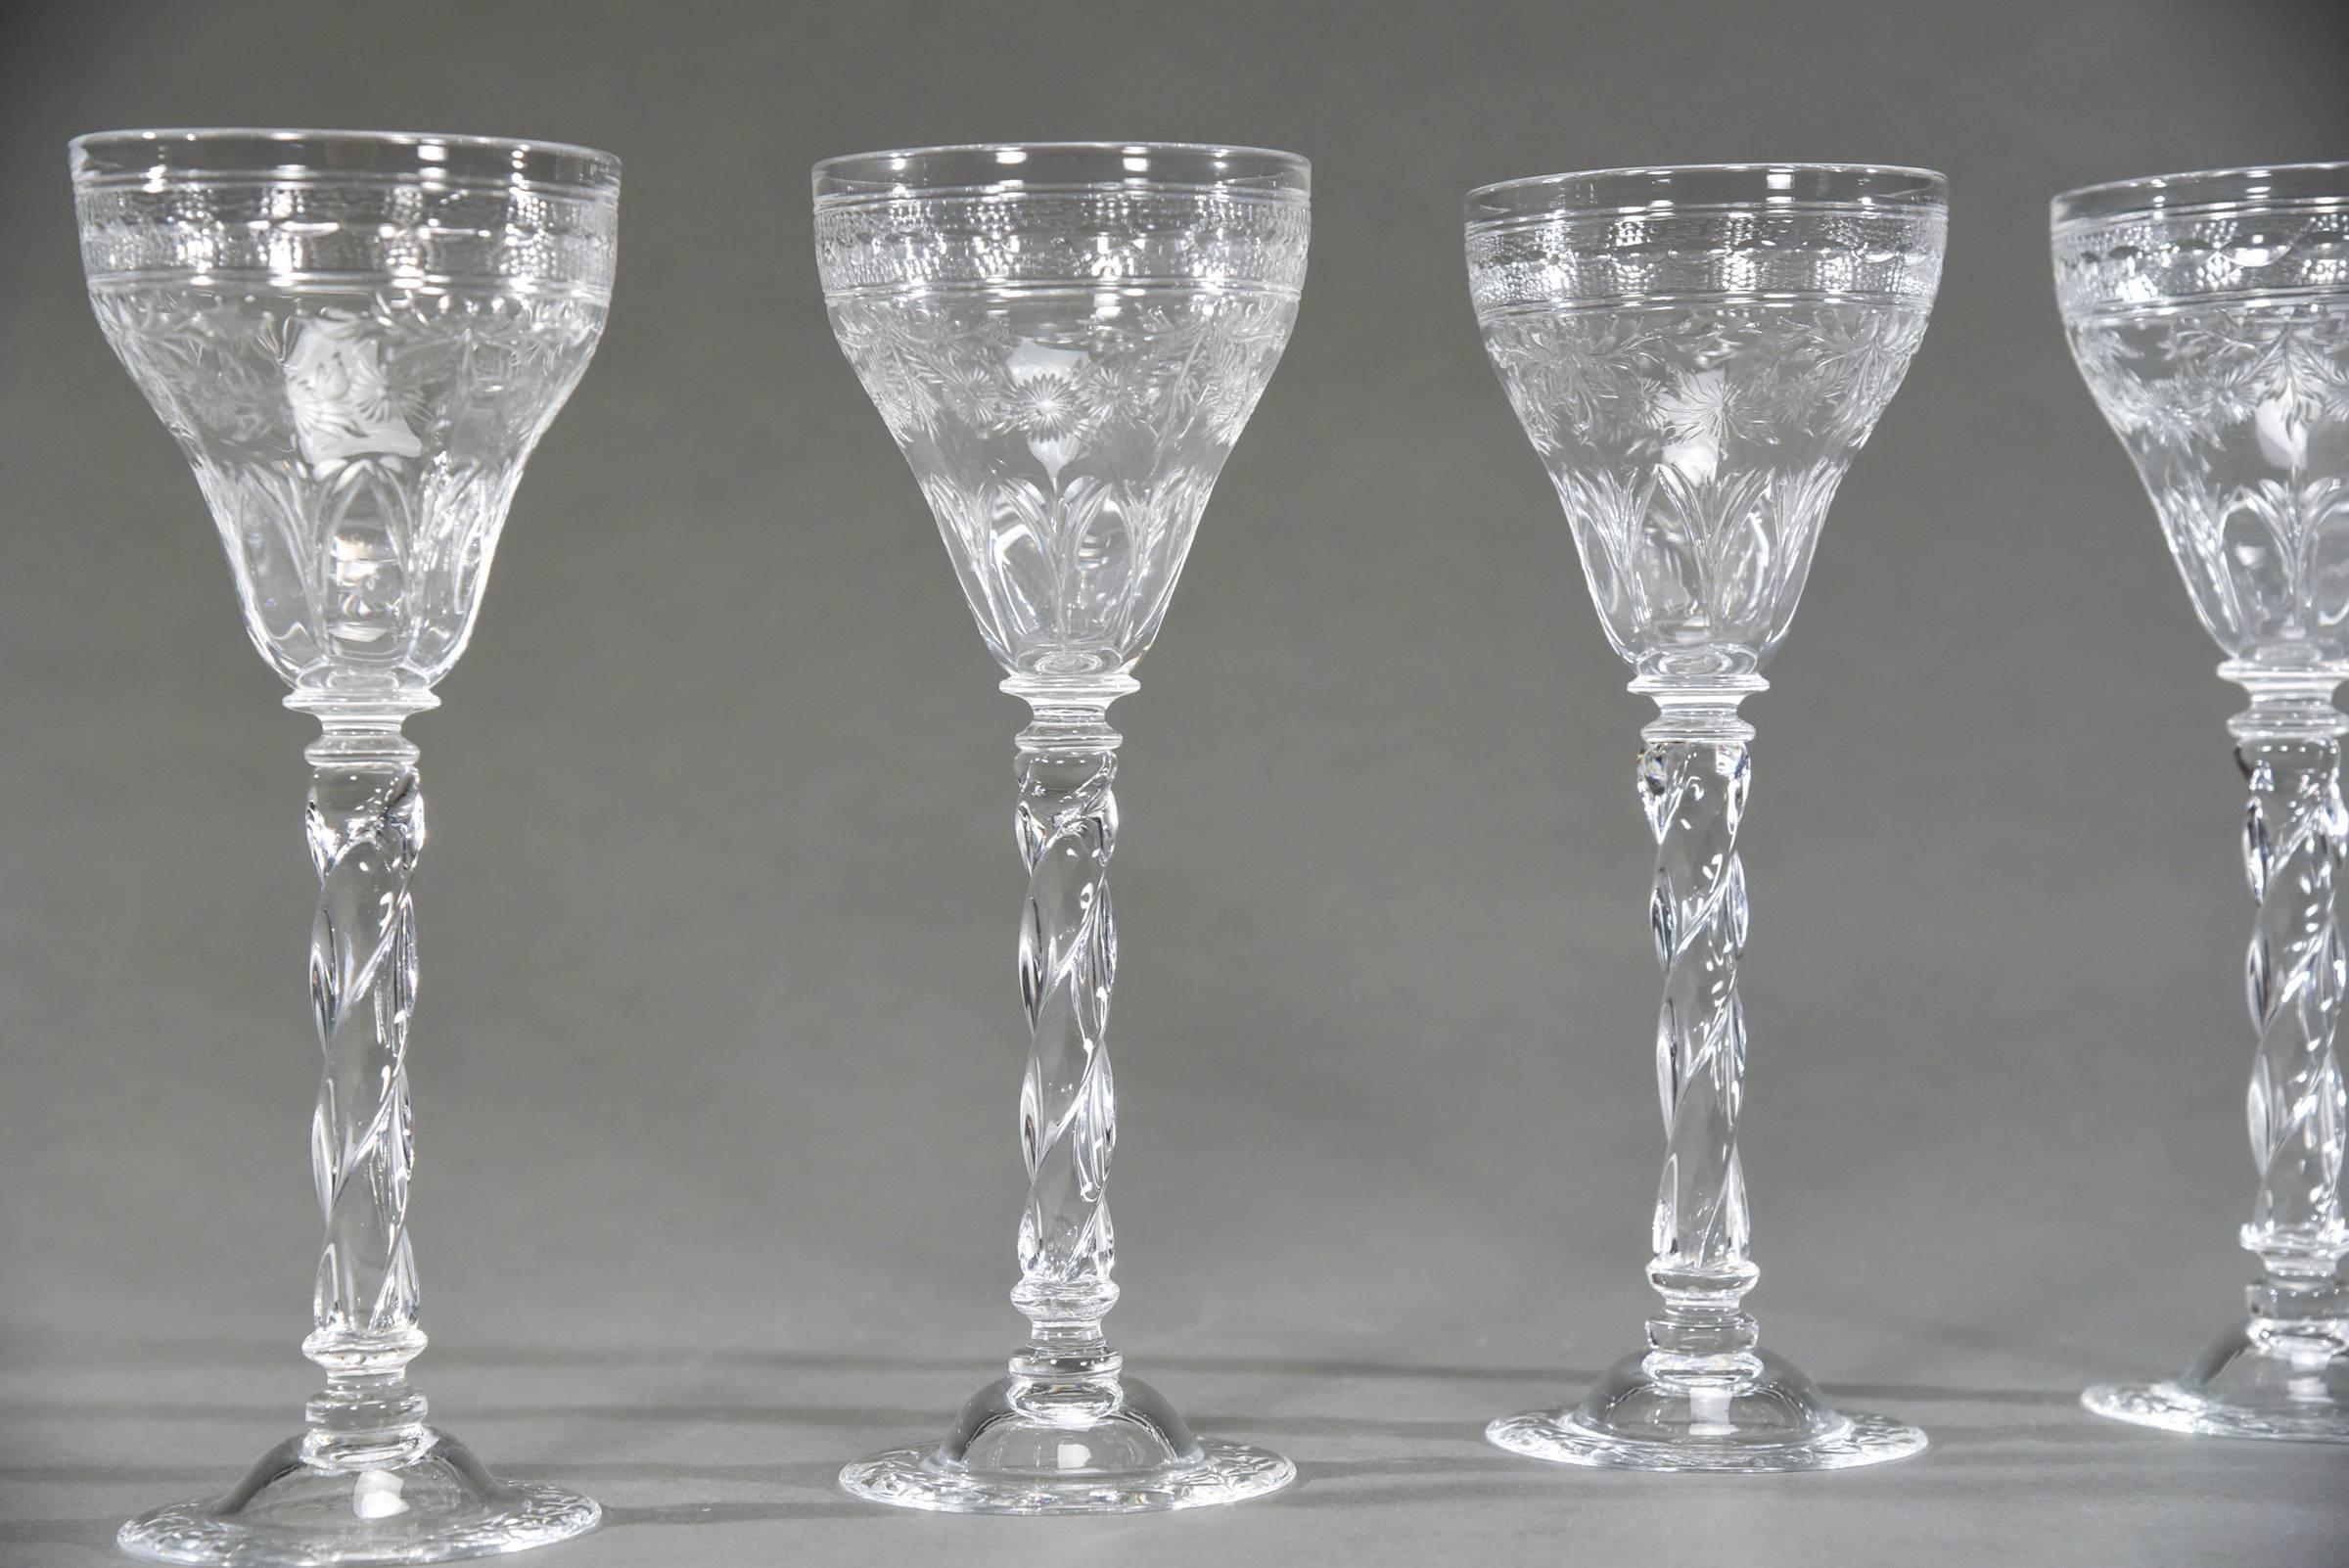 Engraved Set of 12 Webb Tall Handblown Crystal Goblets with Wheel Cutting and Spiral Stem